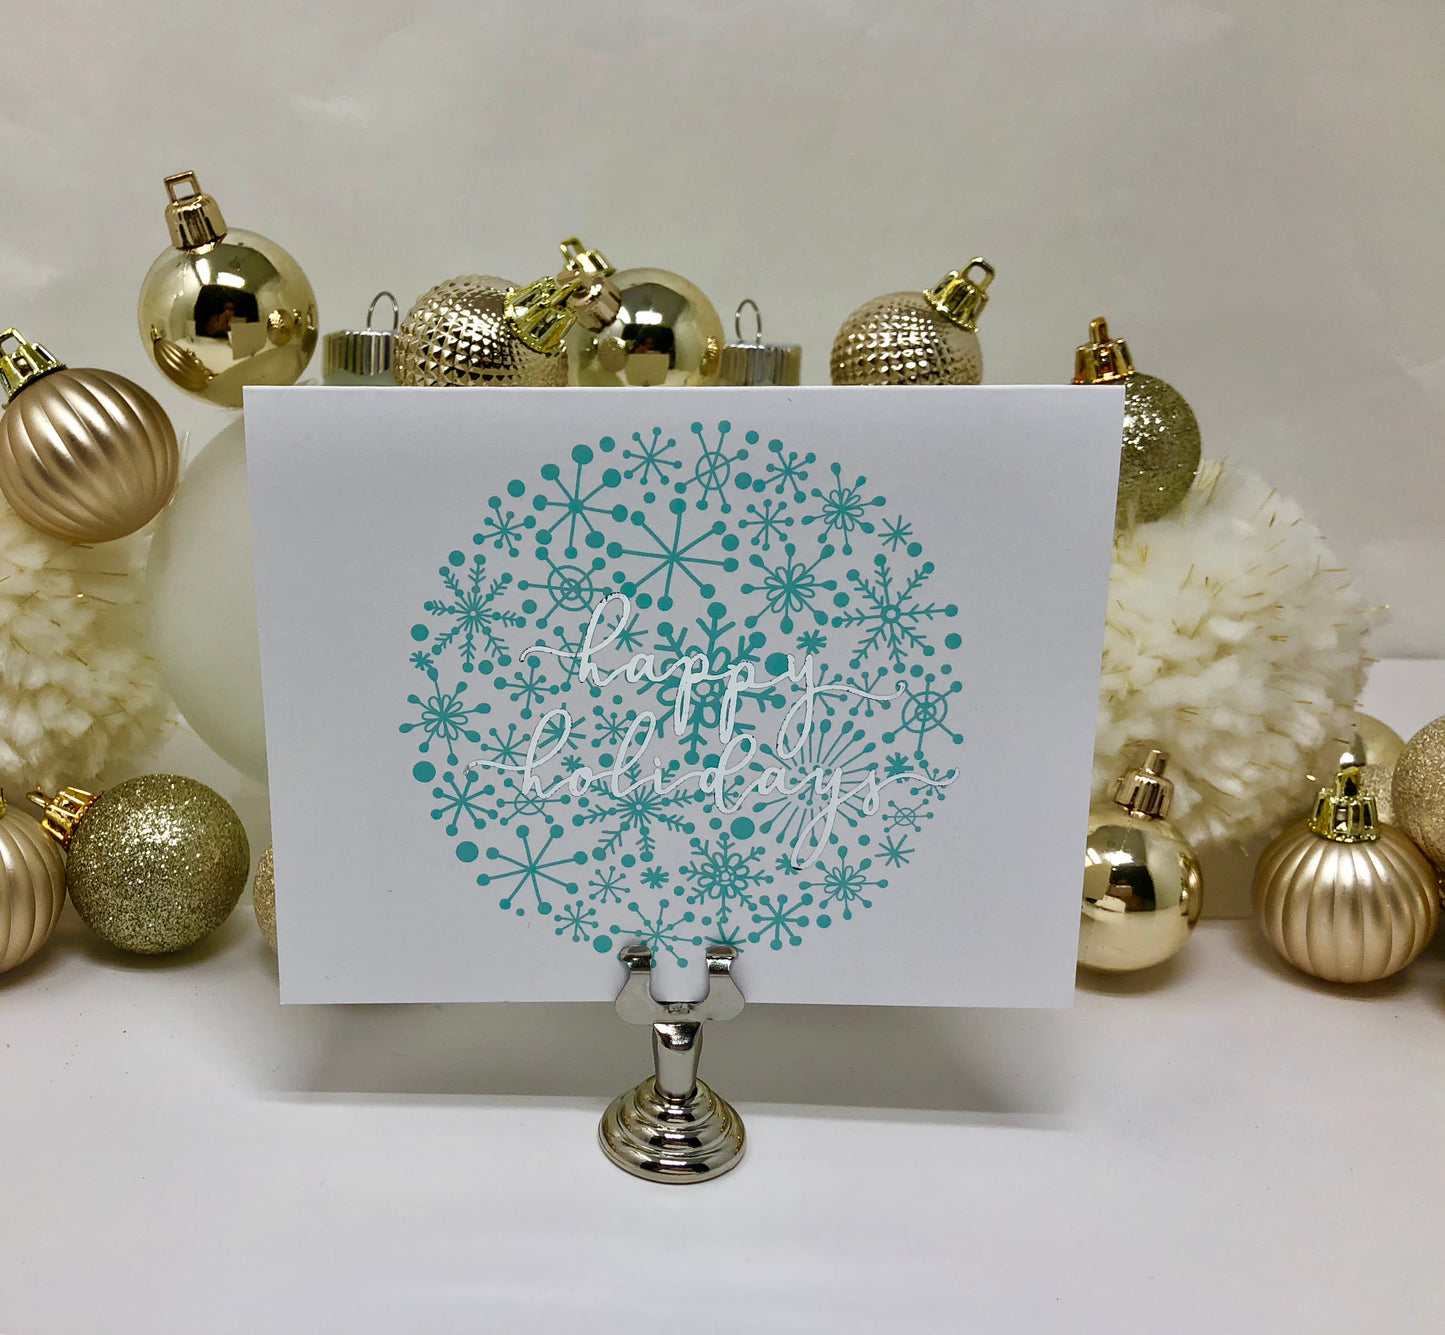 Gold Foil Happy Holidays Snowflake Calligraphy Cards - Roshae Designs